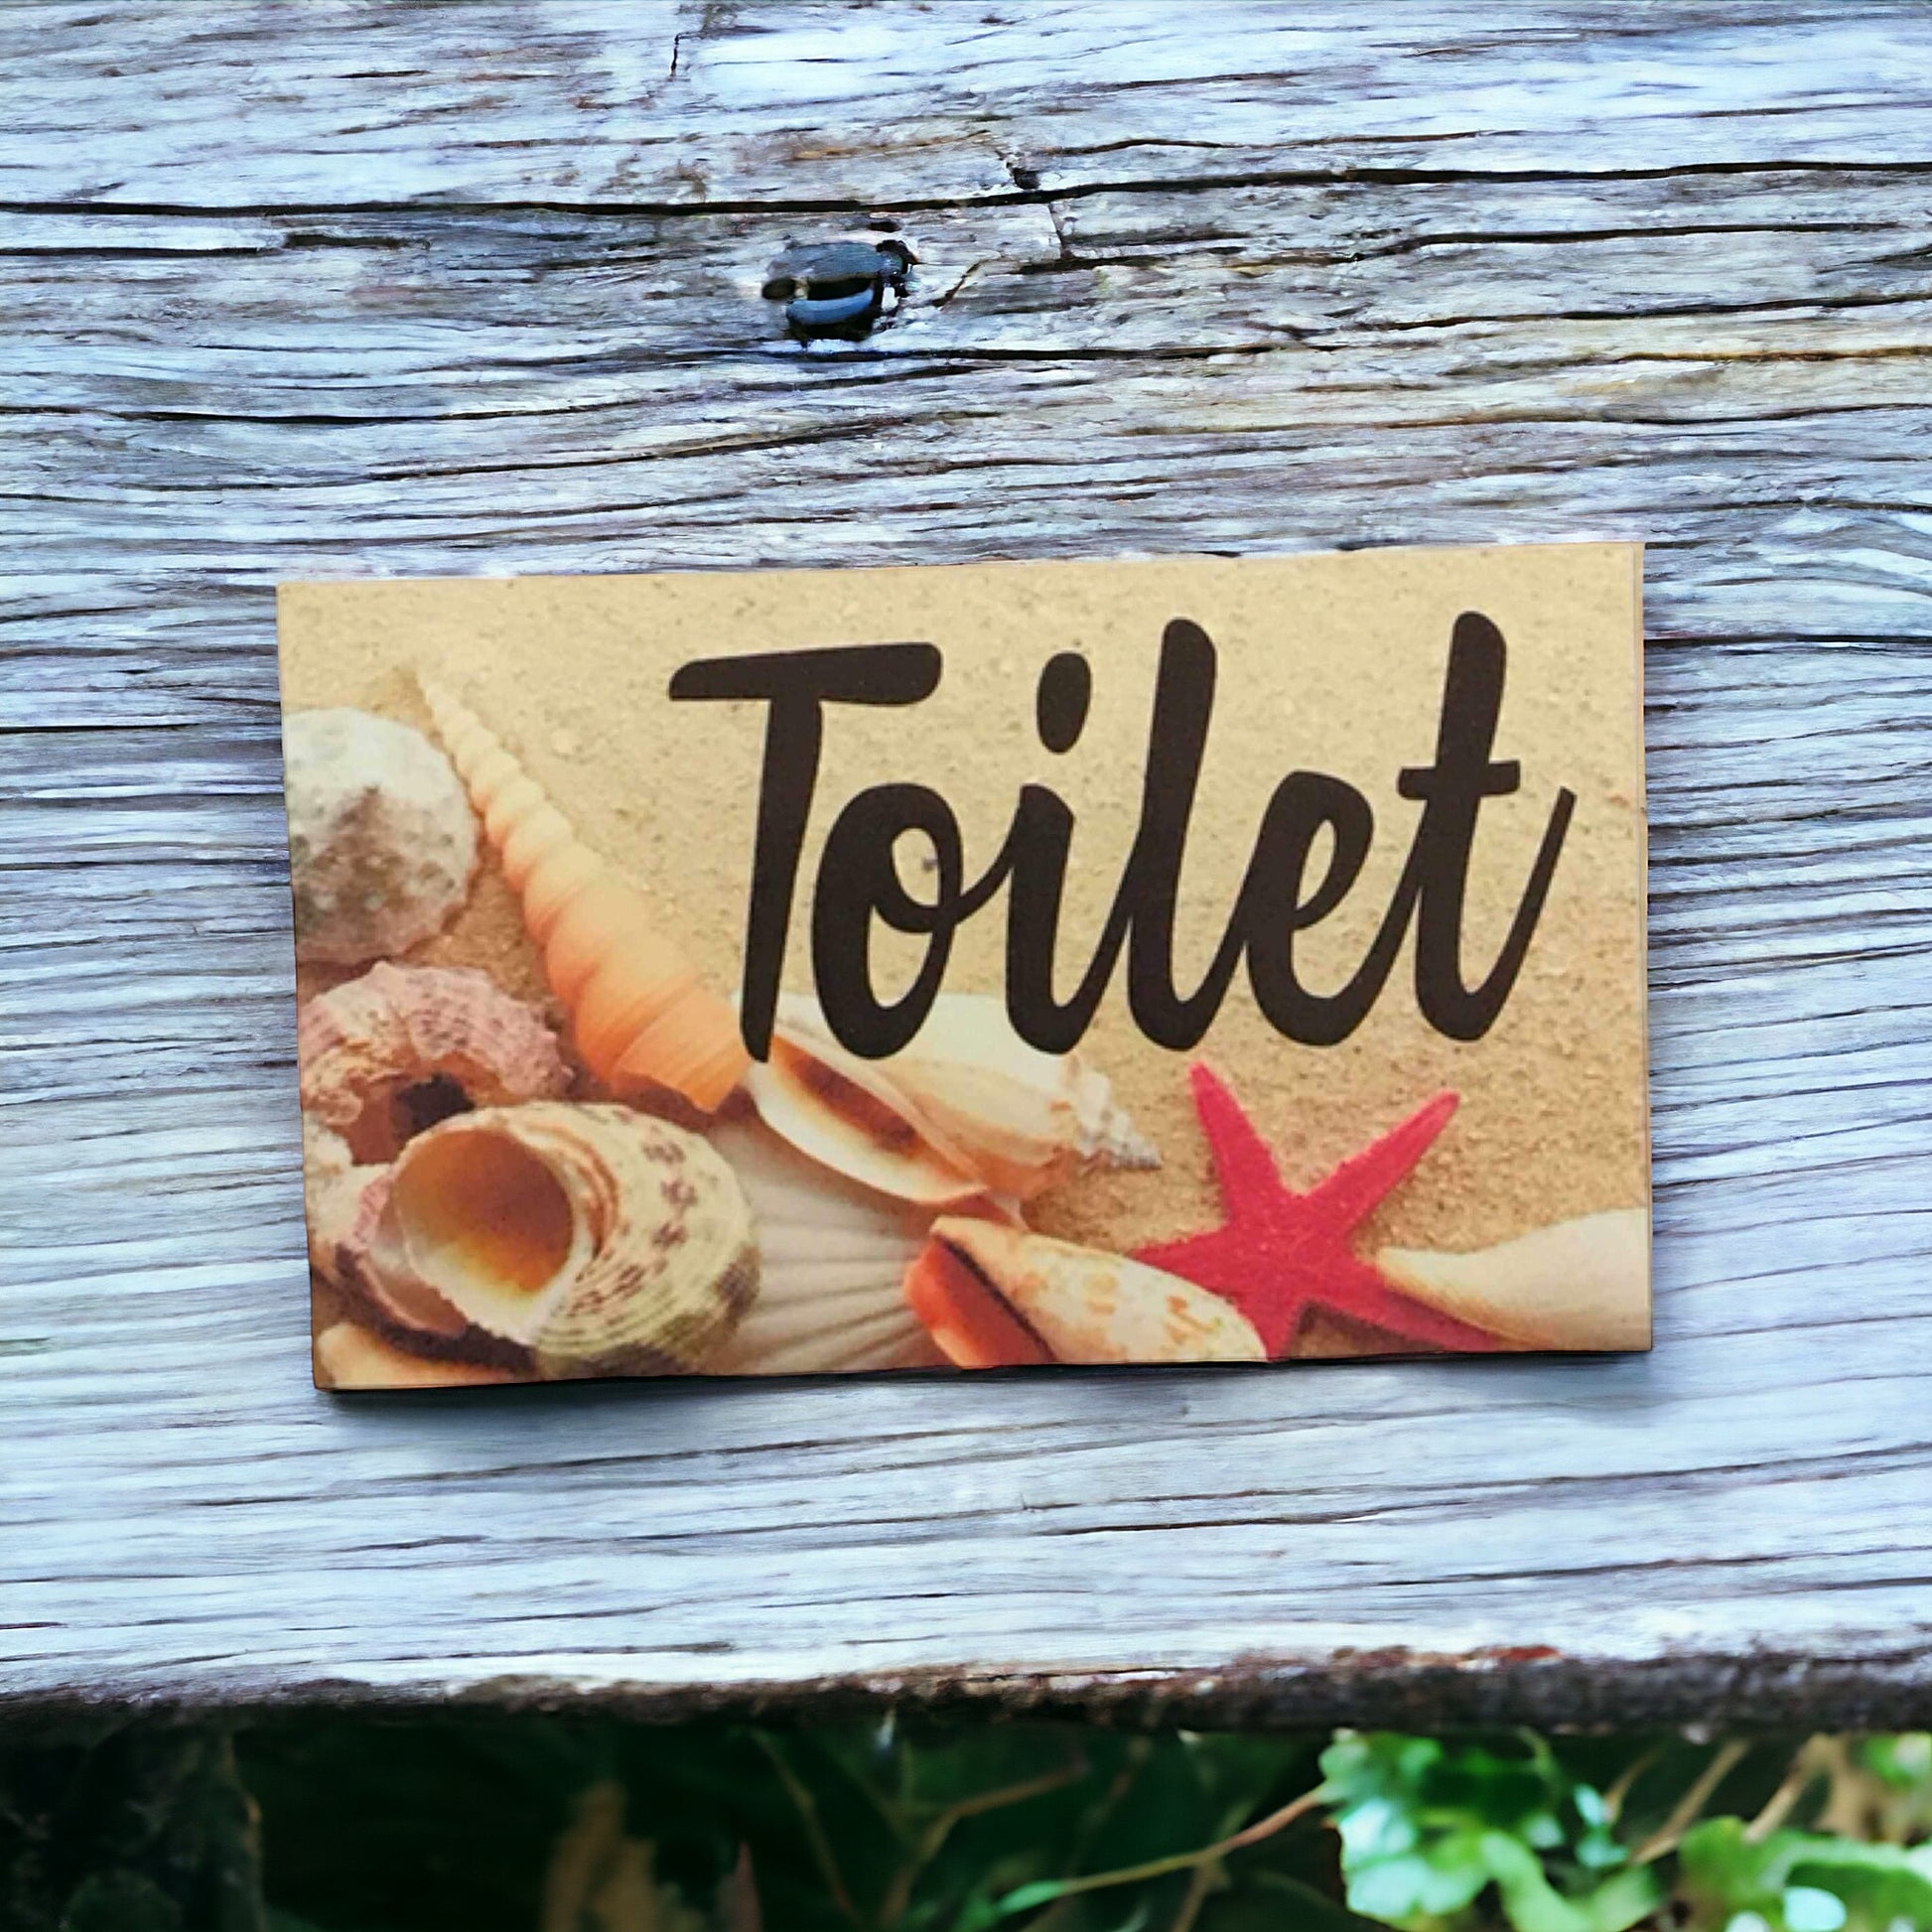 Beach Shells Starfish Toilet Laundry Bathroom Sign - The Renmy Store Homewares & Gifts 